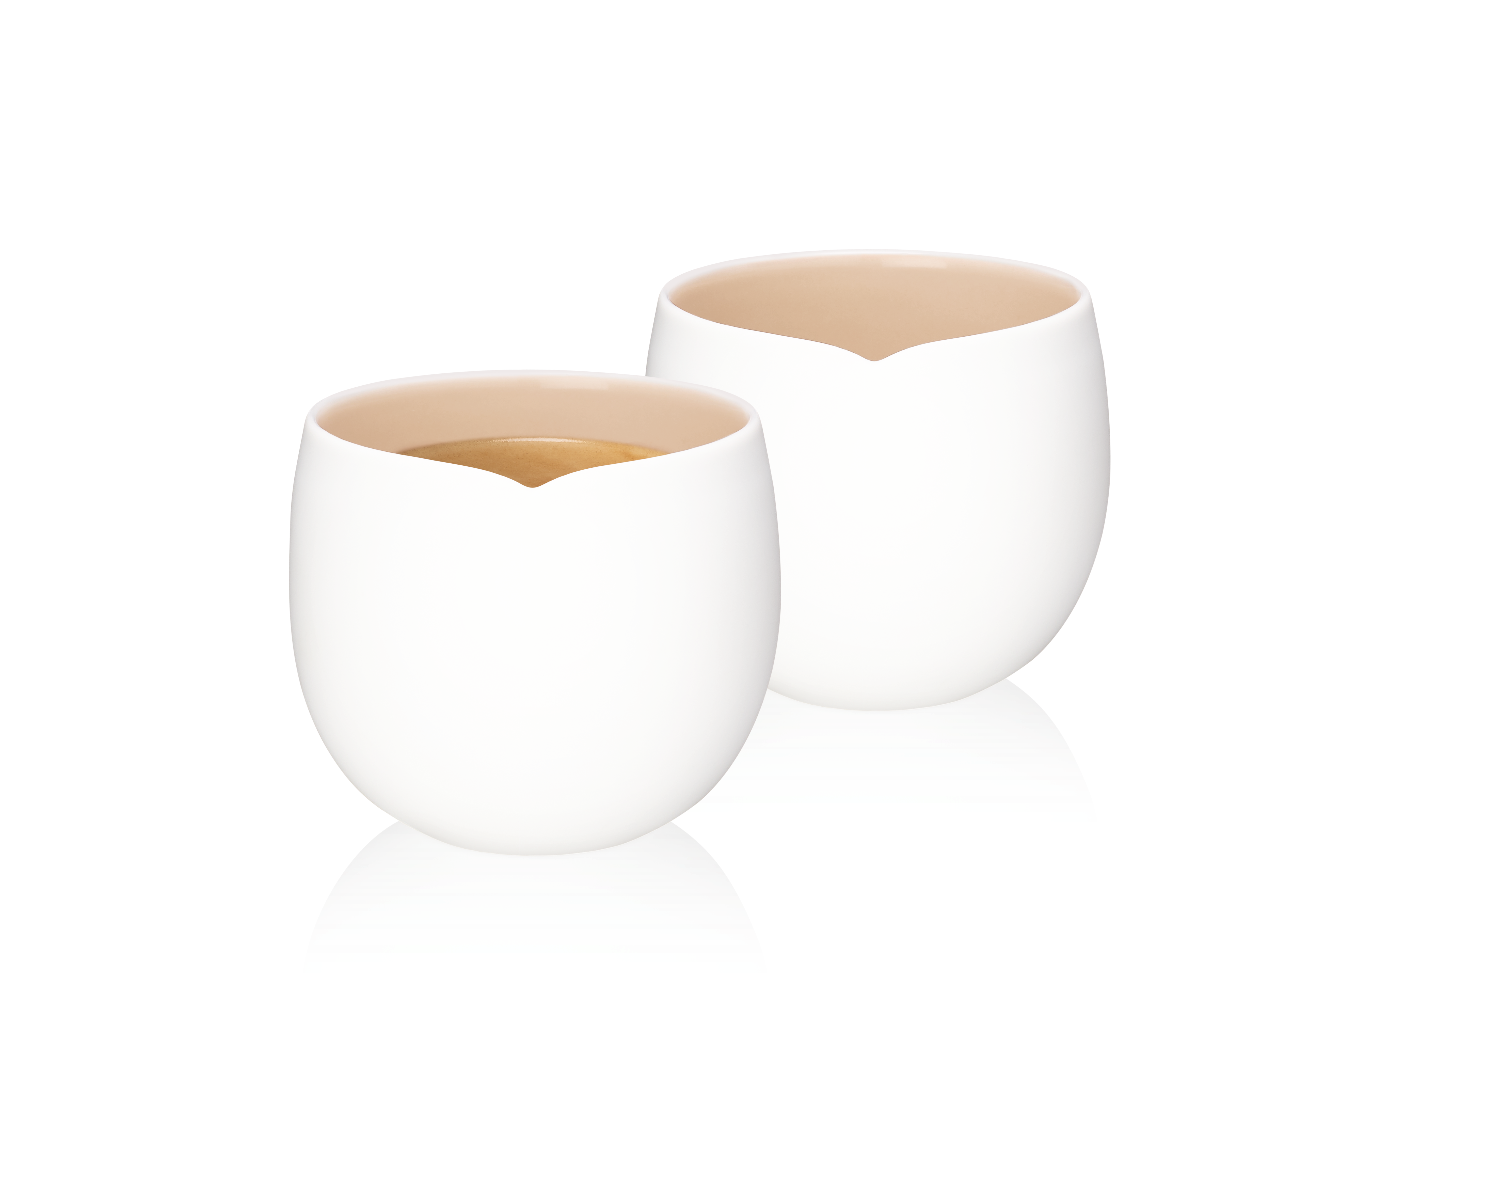 View Lungo Cups Set – CoffecUAE